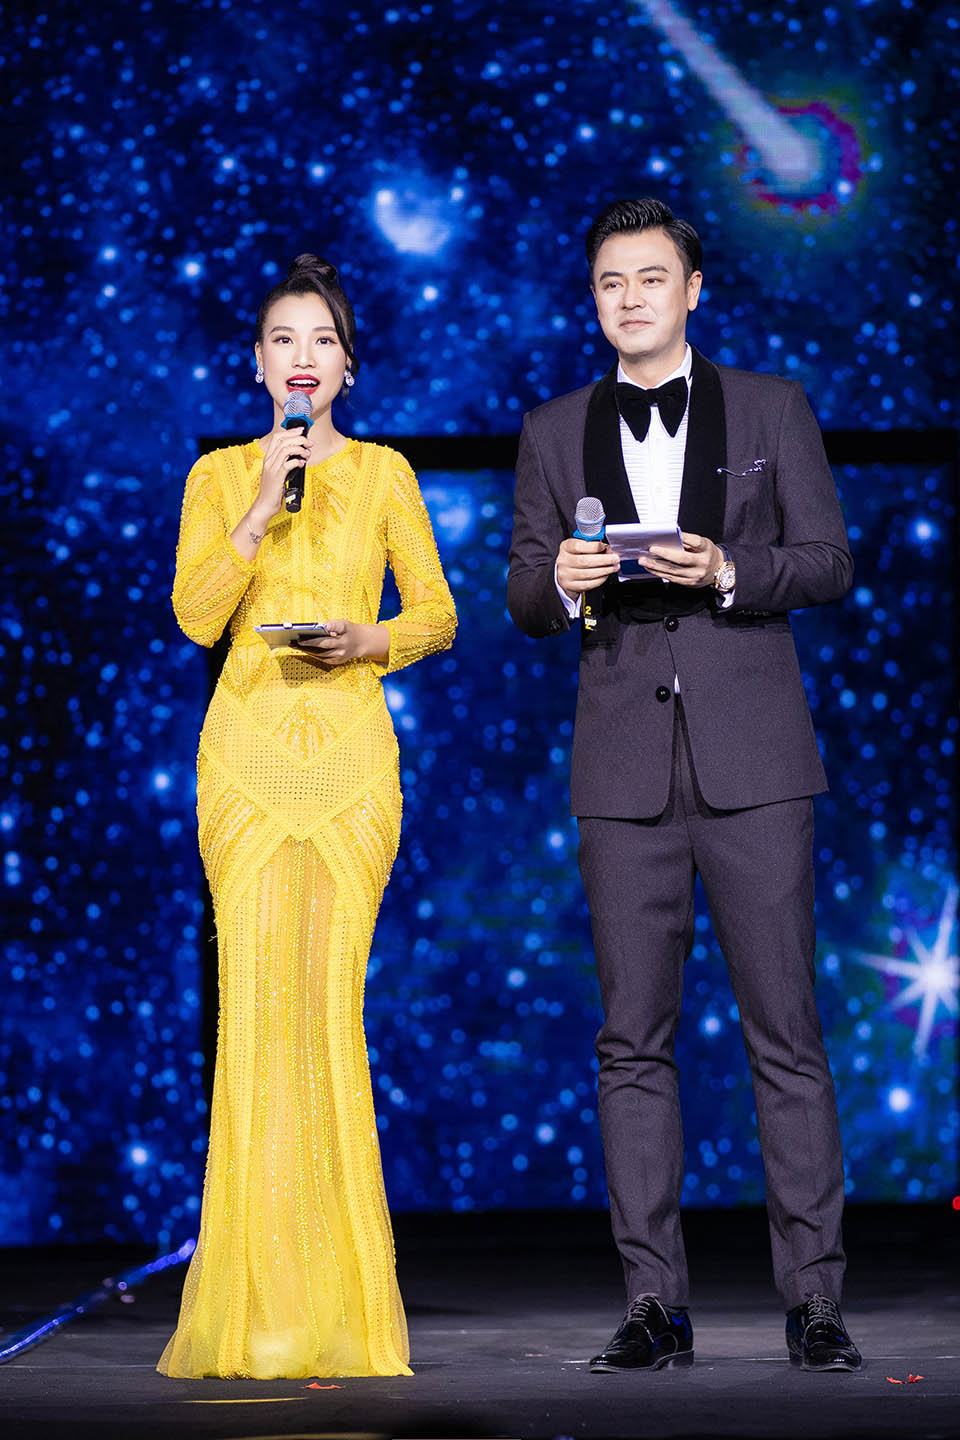 MC Hoang Oanh expensive show, beauty promoted after divorce from Western husband - 5